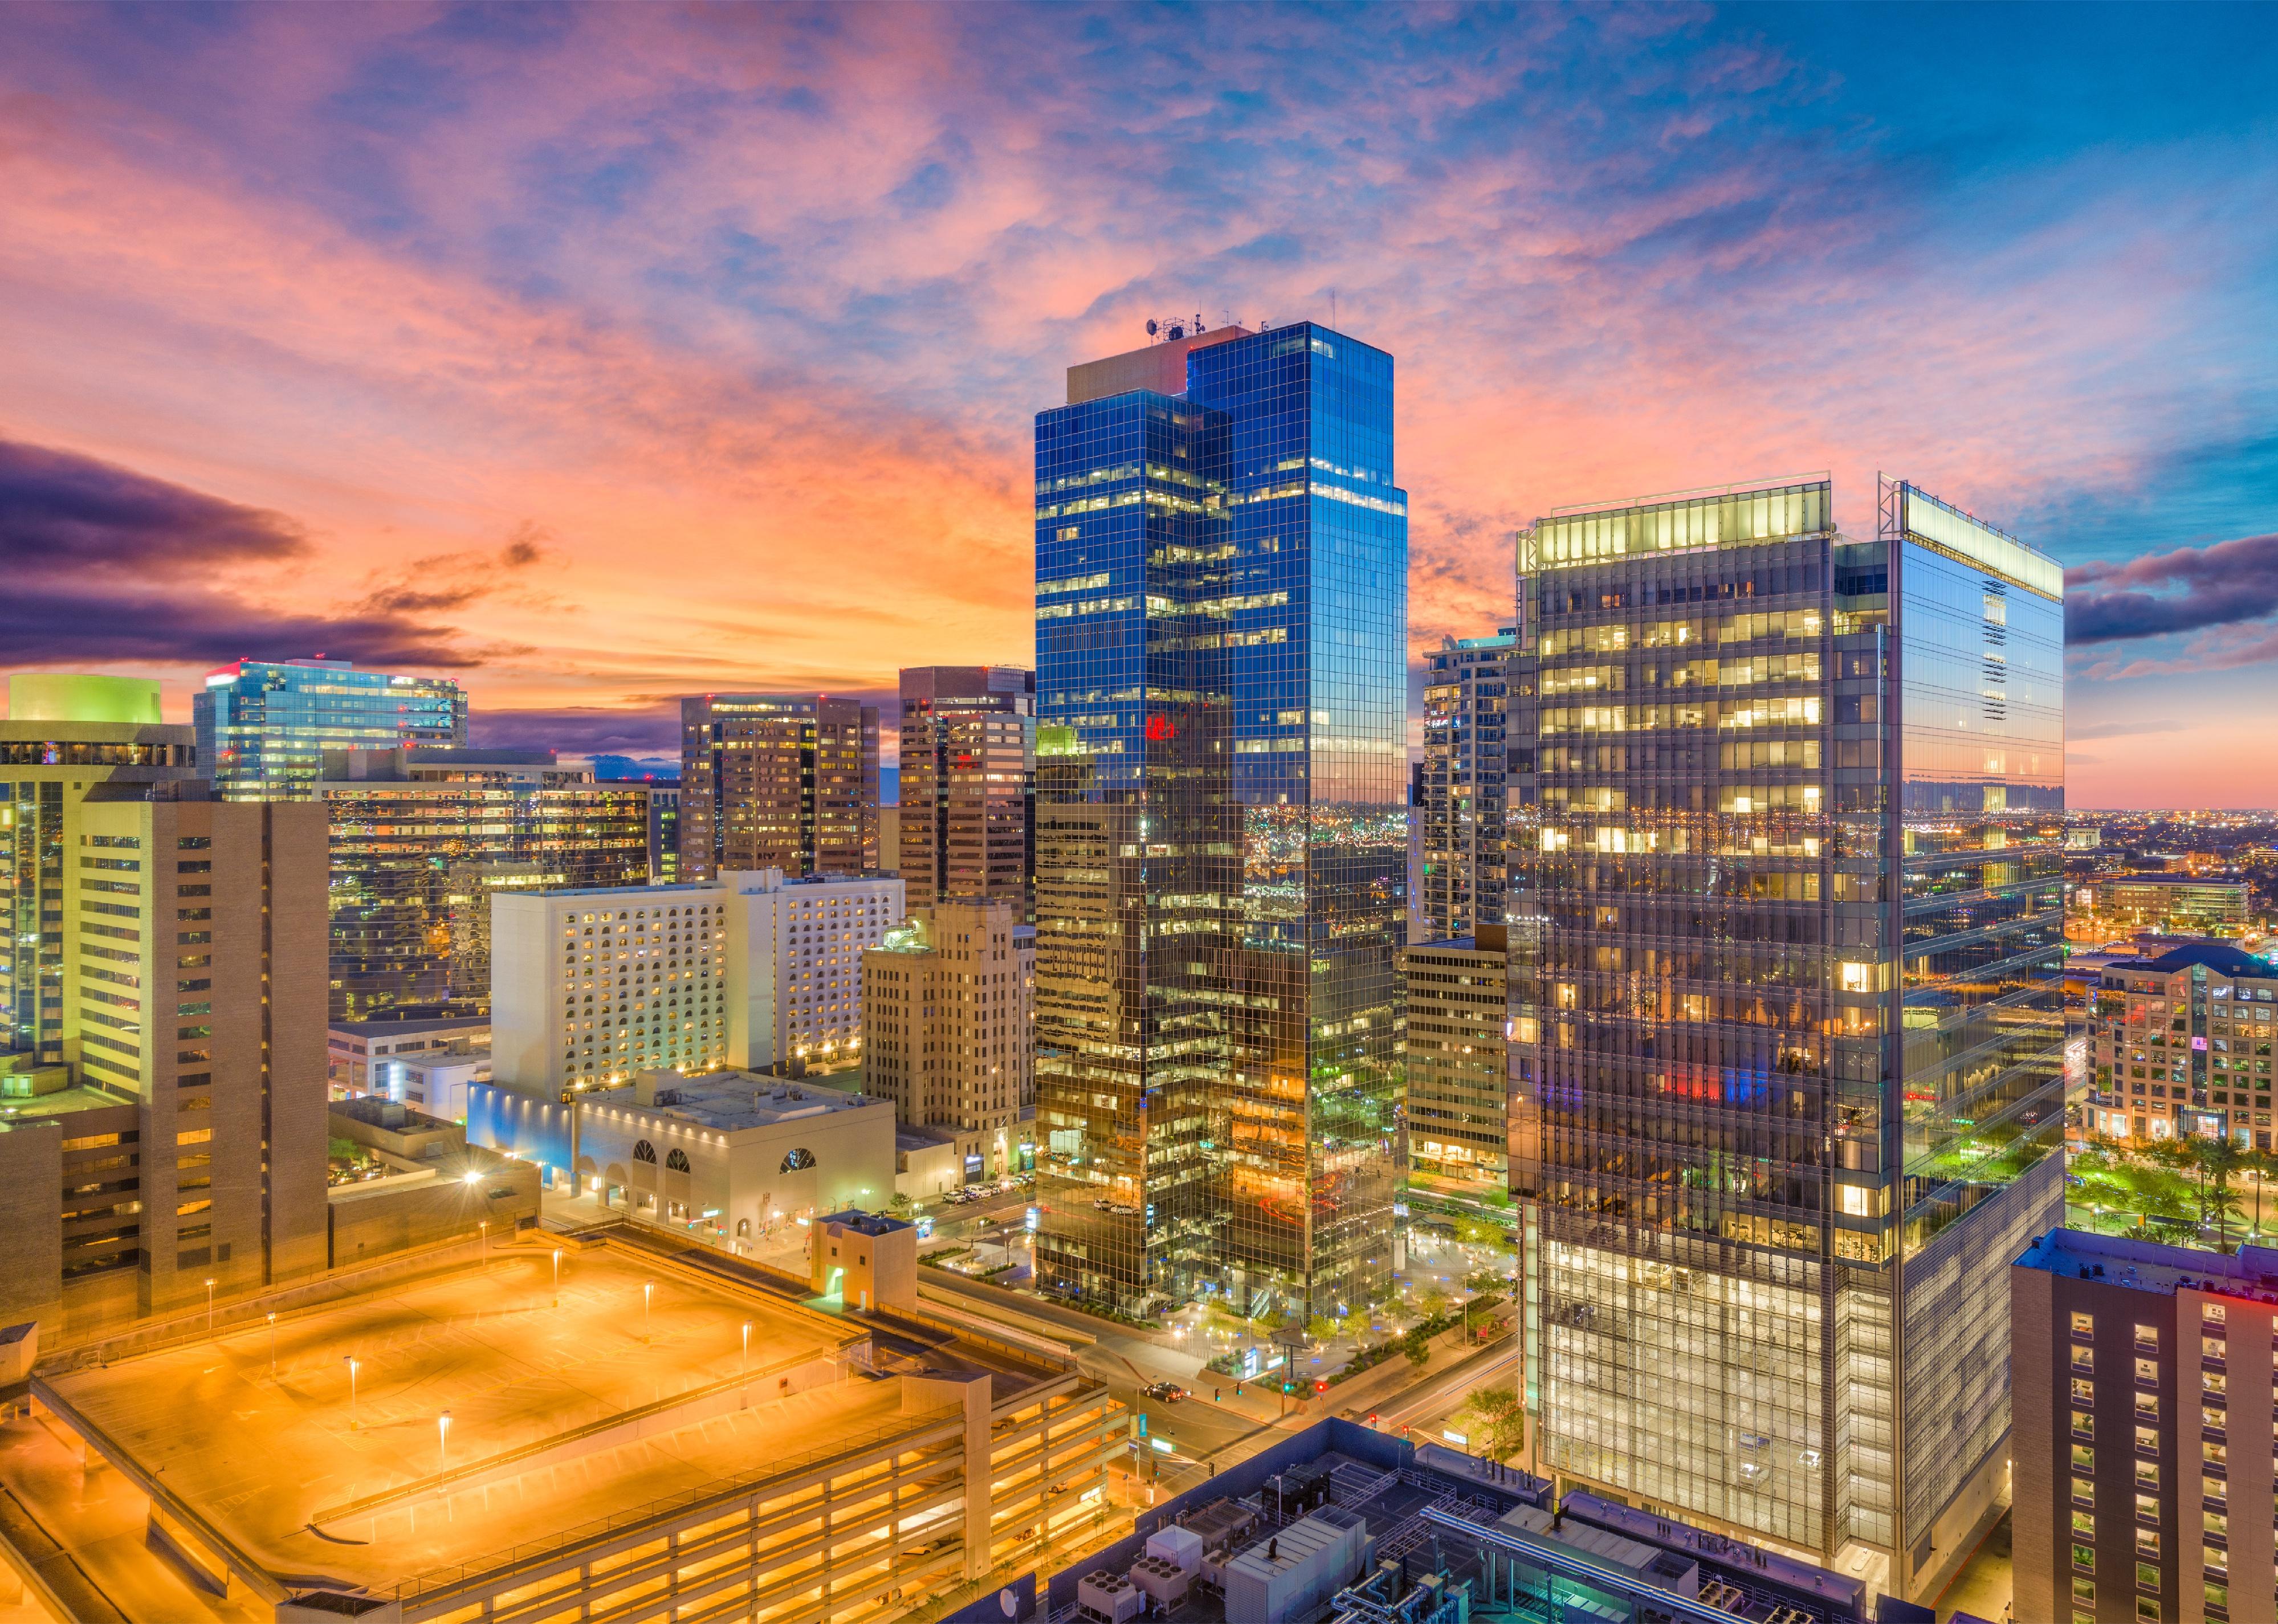 Phoenix cityscape in downtown at sunset.